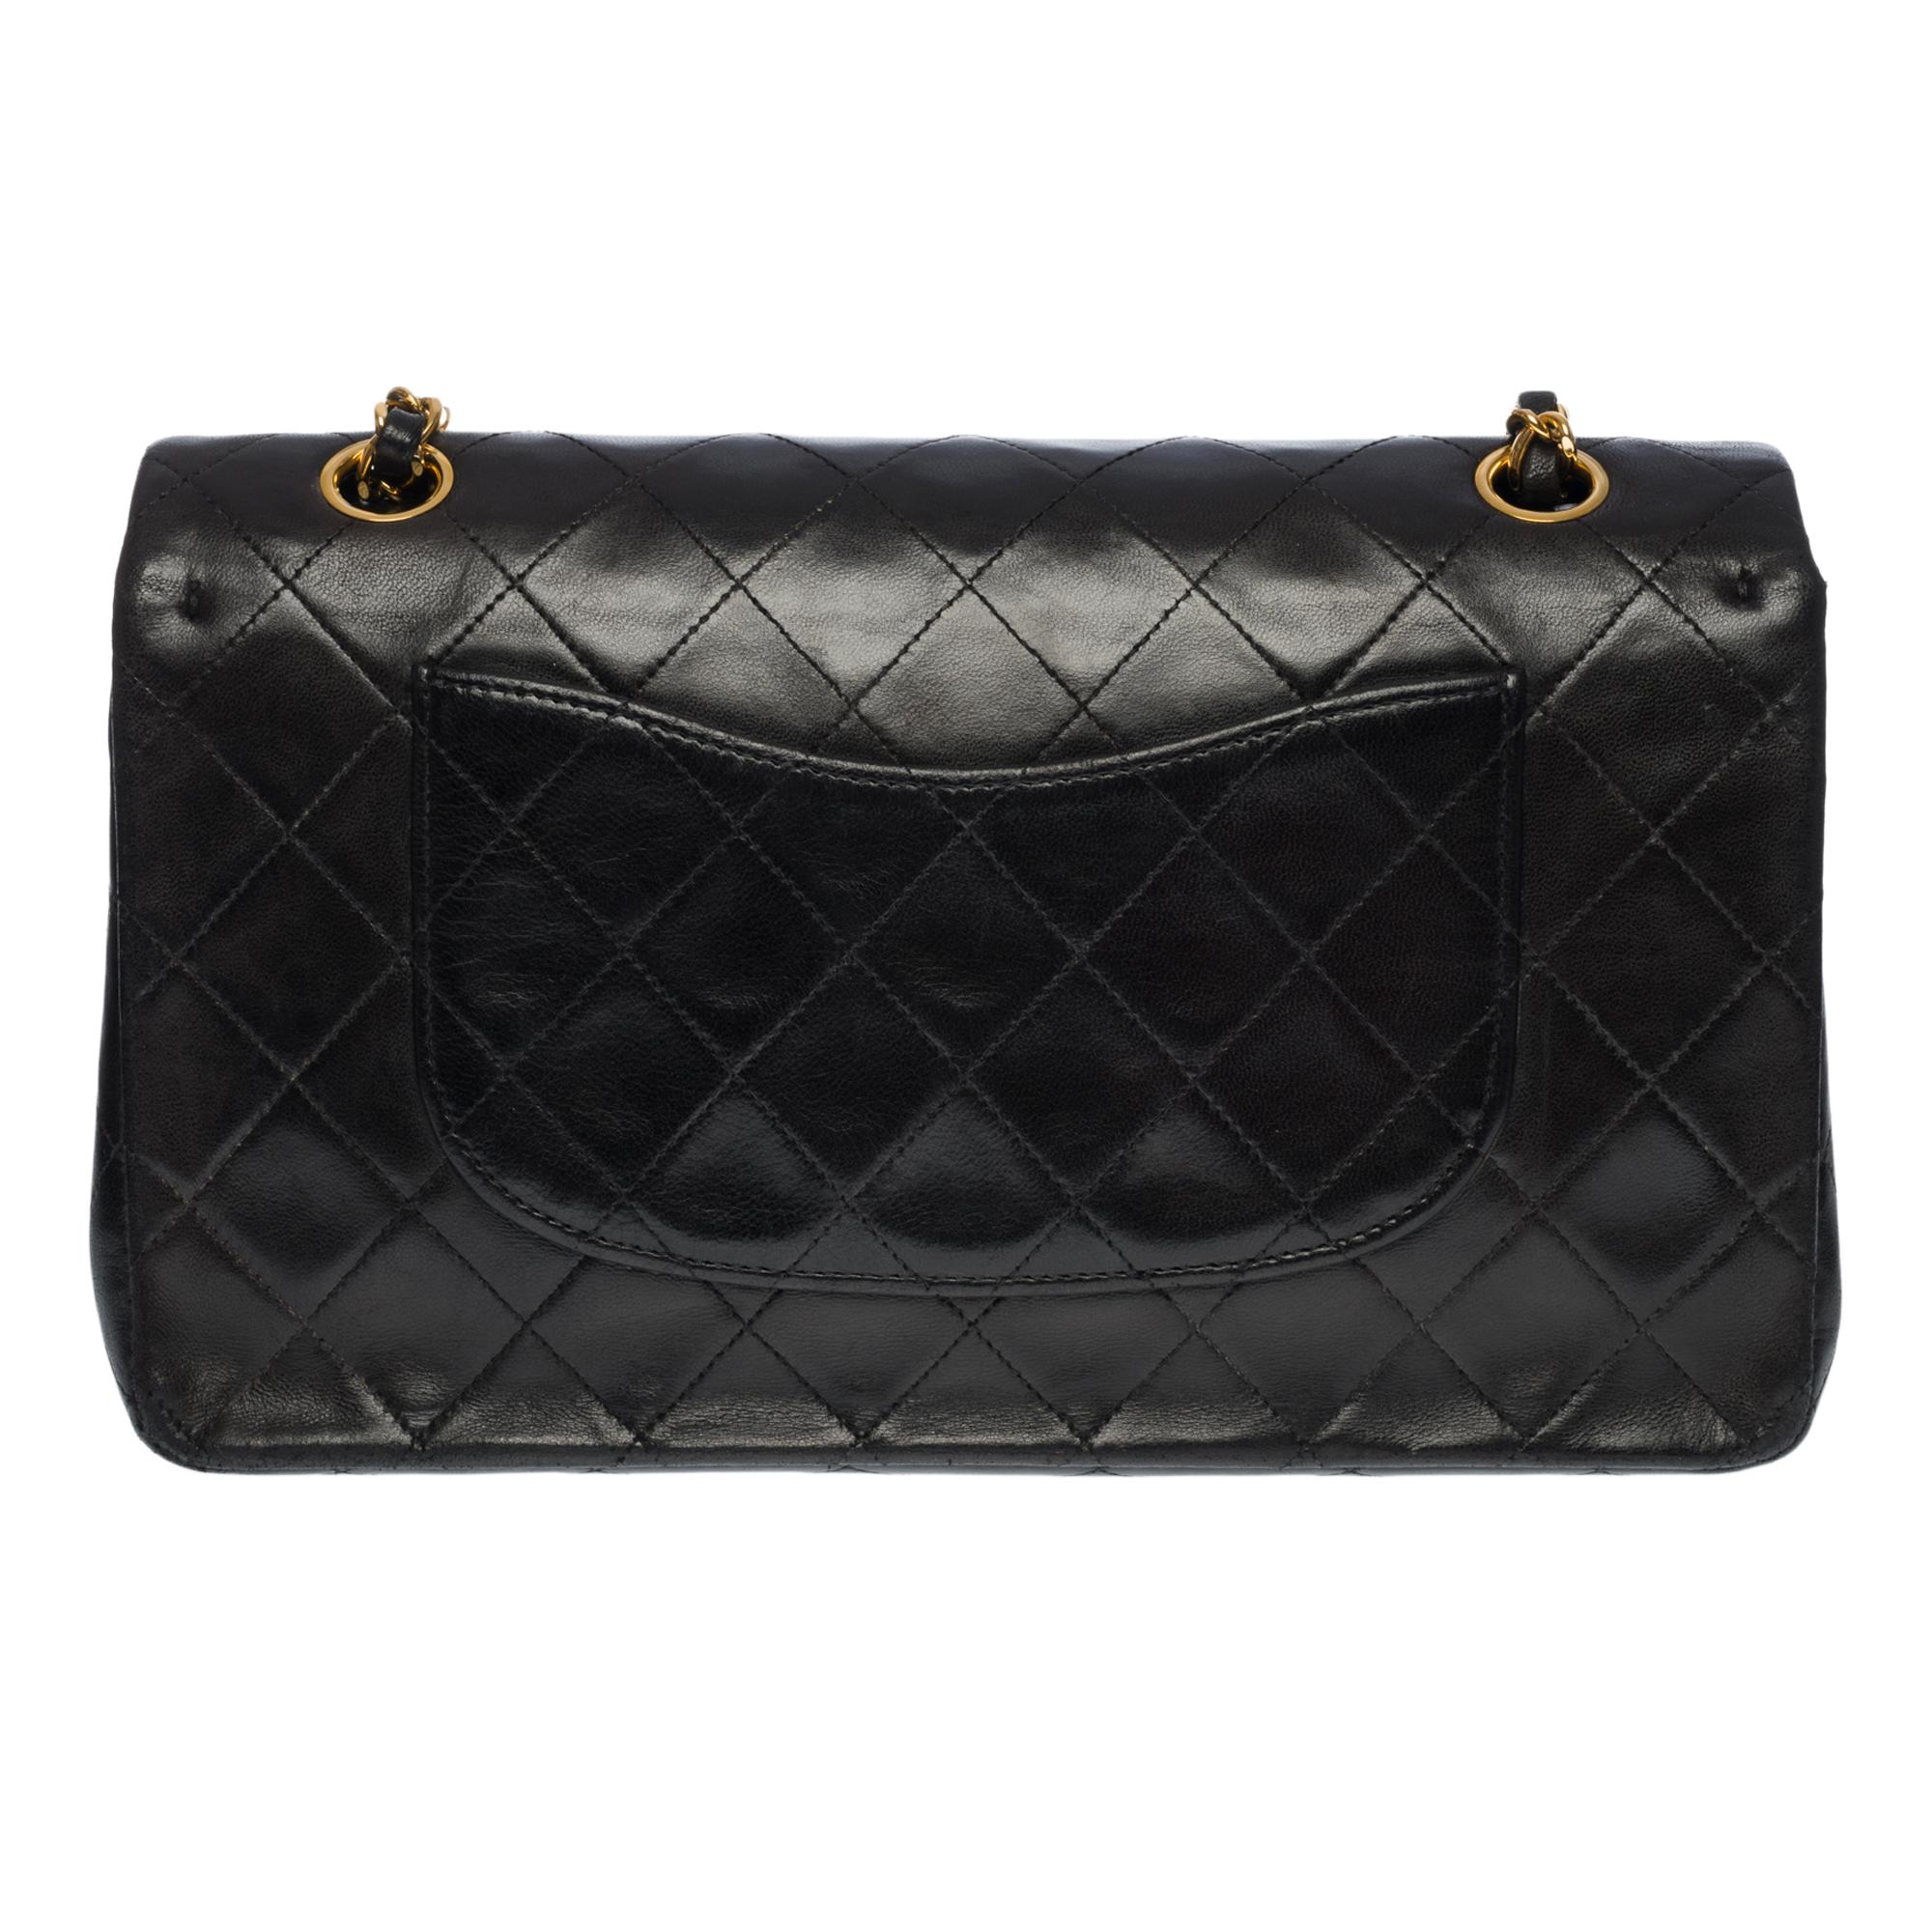 The coveted Chanel Timeless Medium 25 double flap shoulder bag s in black quilted lambskin, gold-tone metal hardware, gold-tone metal chain interwoven with black leather for a shoulder and shoulder strap

Backpack pocket
Flap closure, gold-tone CC